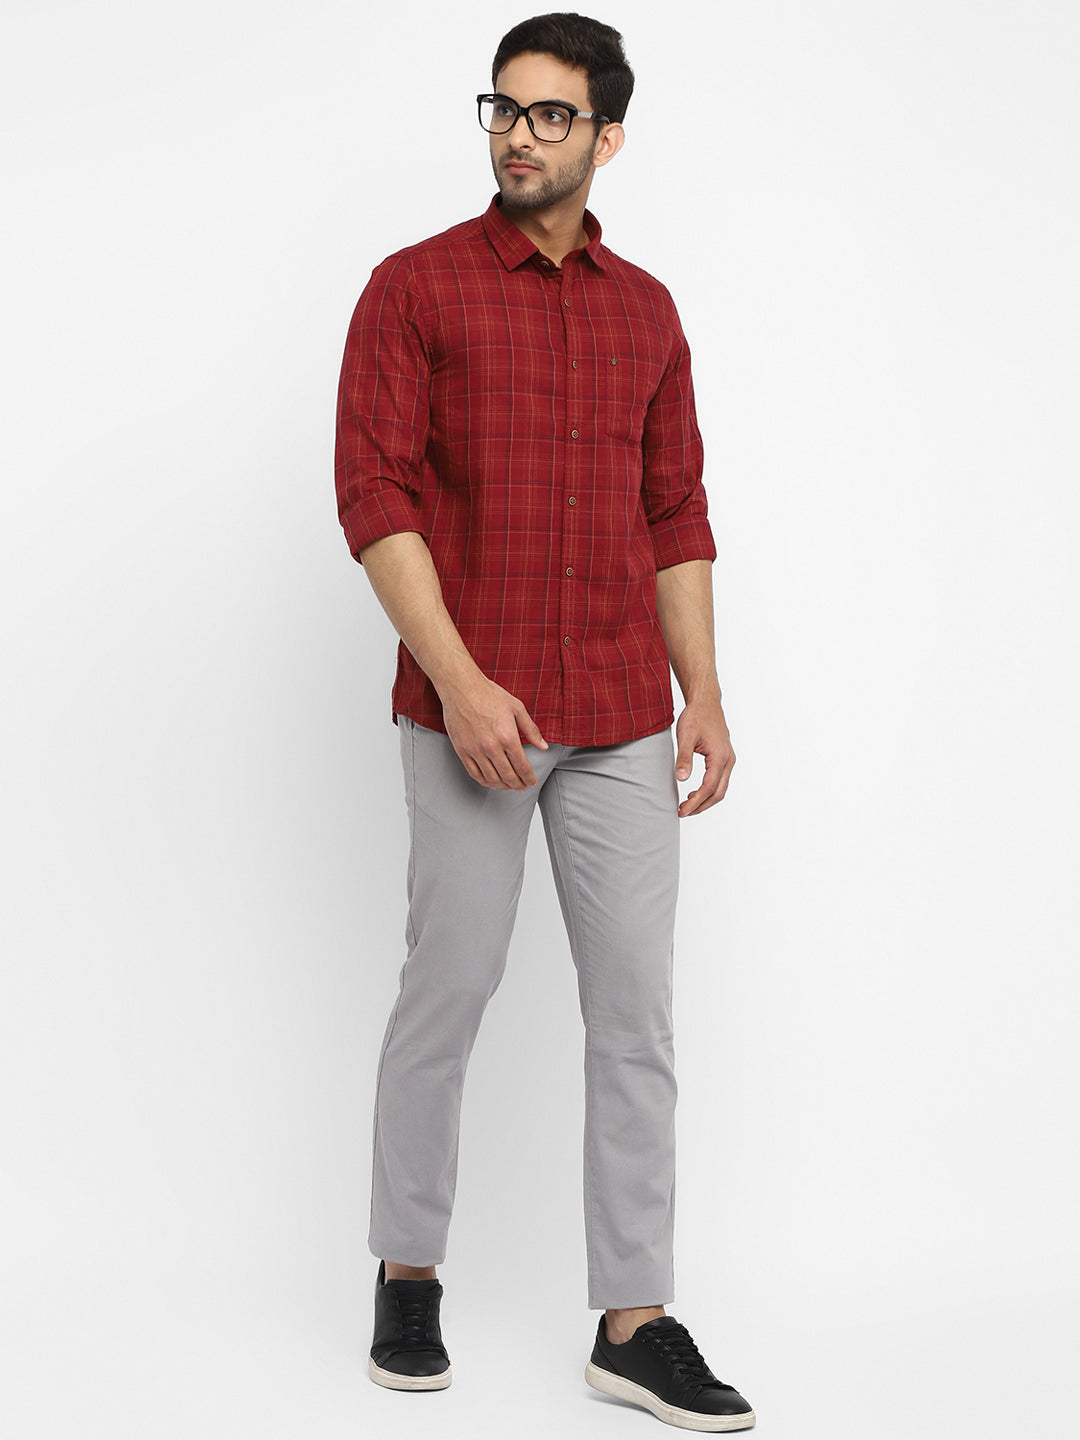 100% Cotton Red Checkered Slim Fit Full Sleeve Casual Shirt